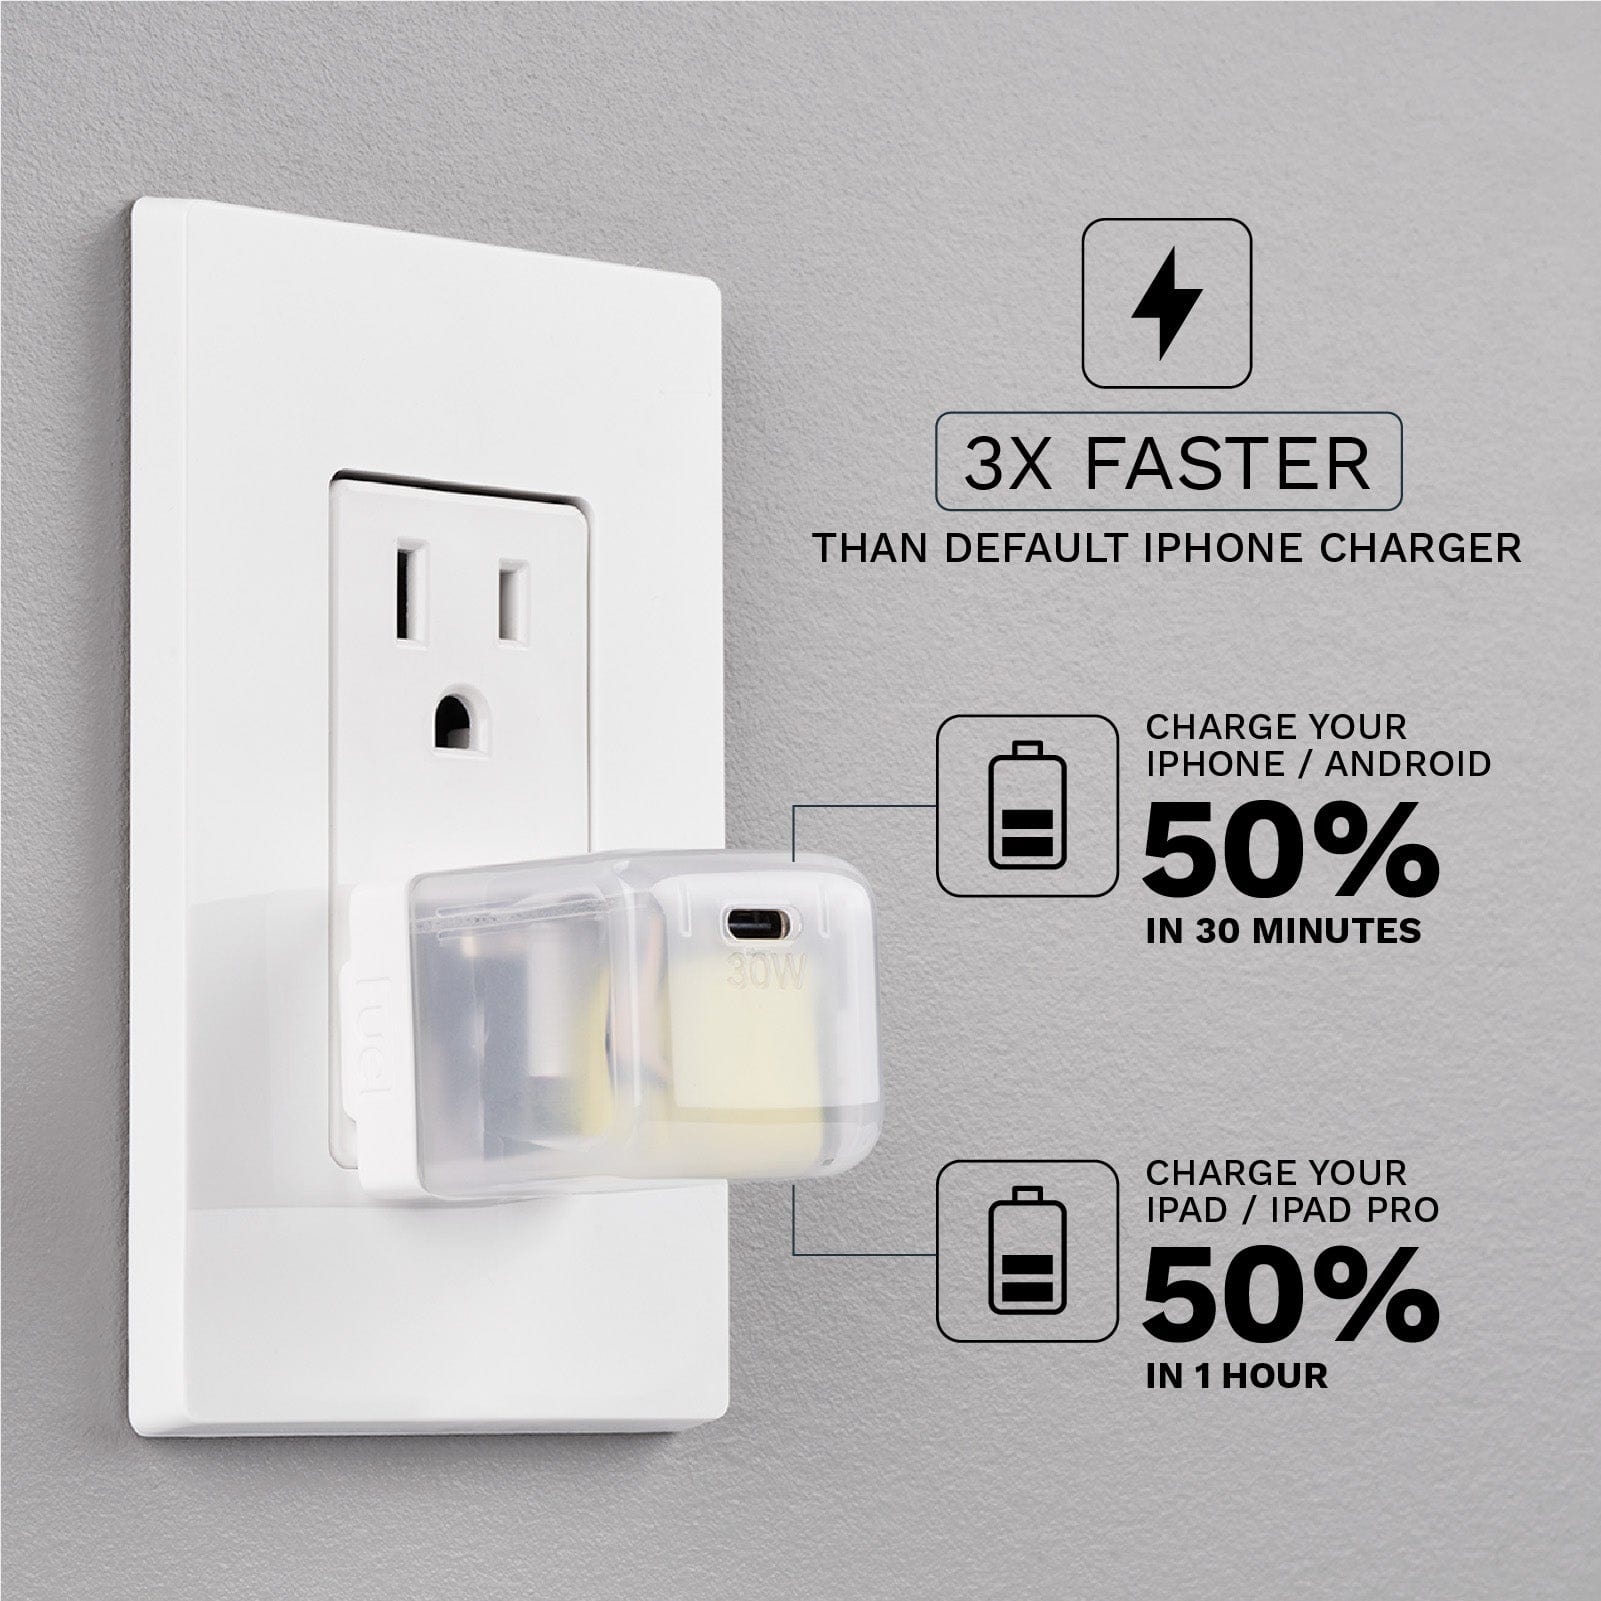 3X FASTER THAN DEFAULT IPHONE CHARGER. CHARGE YOUR IPHONE /. ANDROID 50% IN 30 MINUTES. CHARGER YOUR IPAD / IPAD PRO 50% IN 1 HOUR.